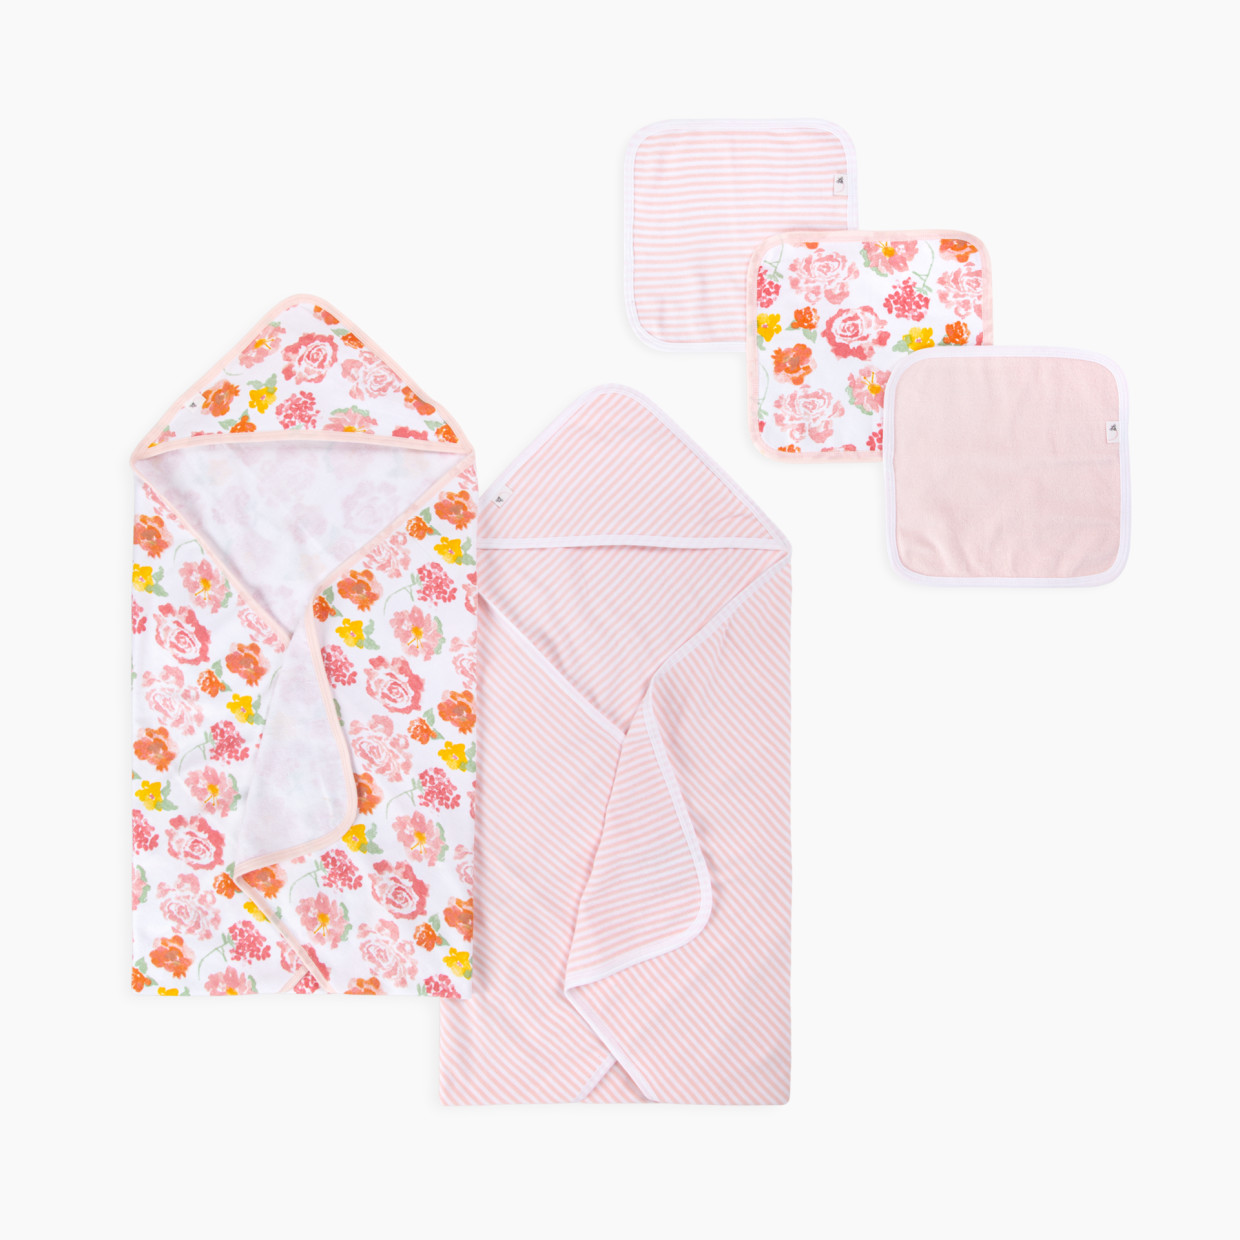 Burt's Bees Baby Organic Single-Ply Hooded Towel with Washcloth - Rosy Spring.